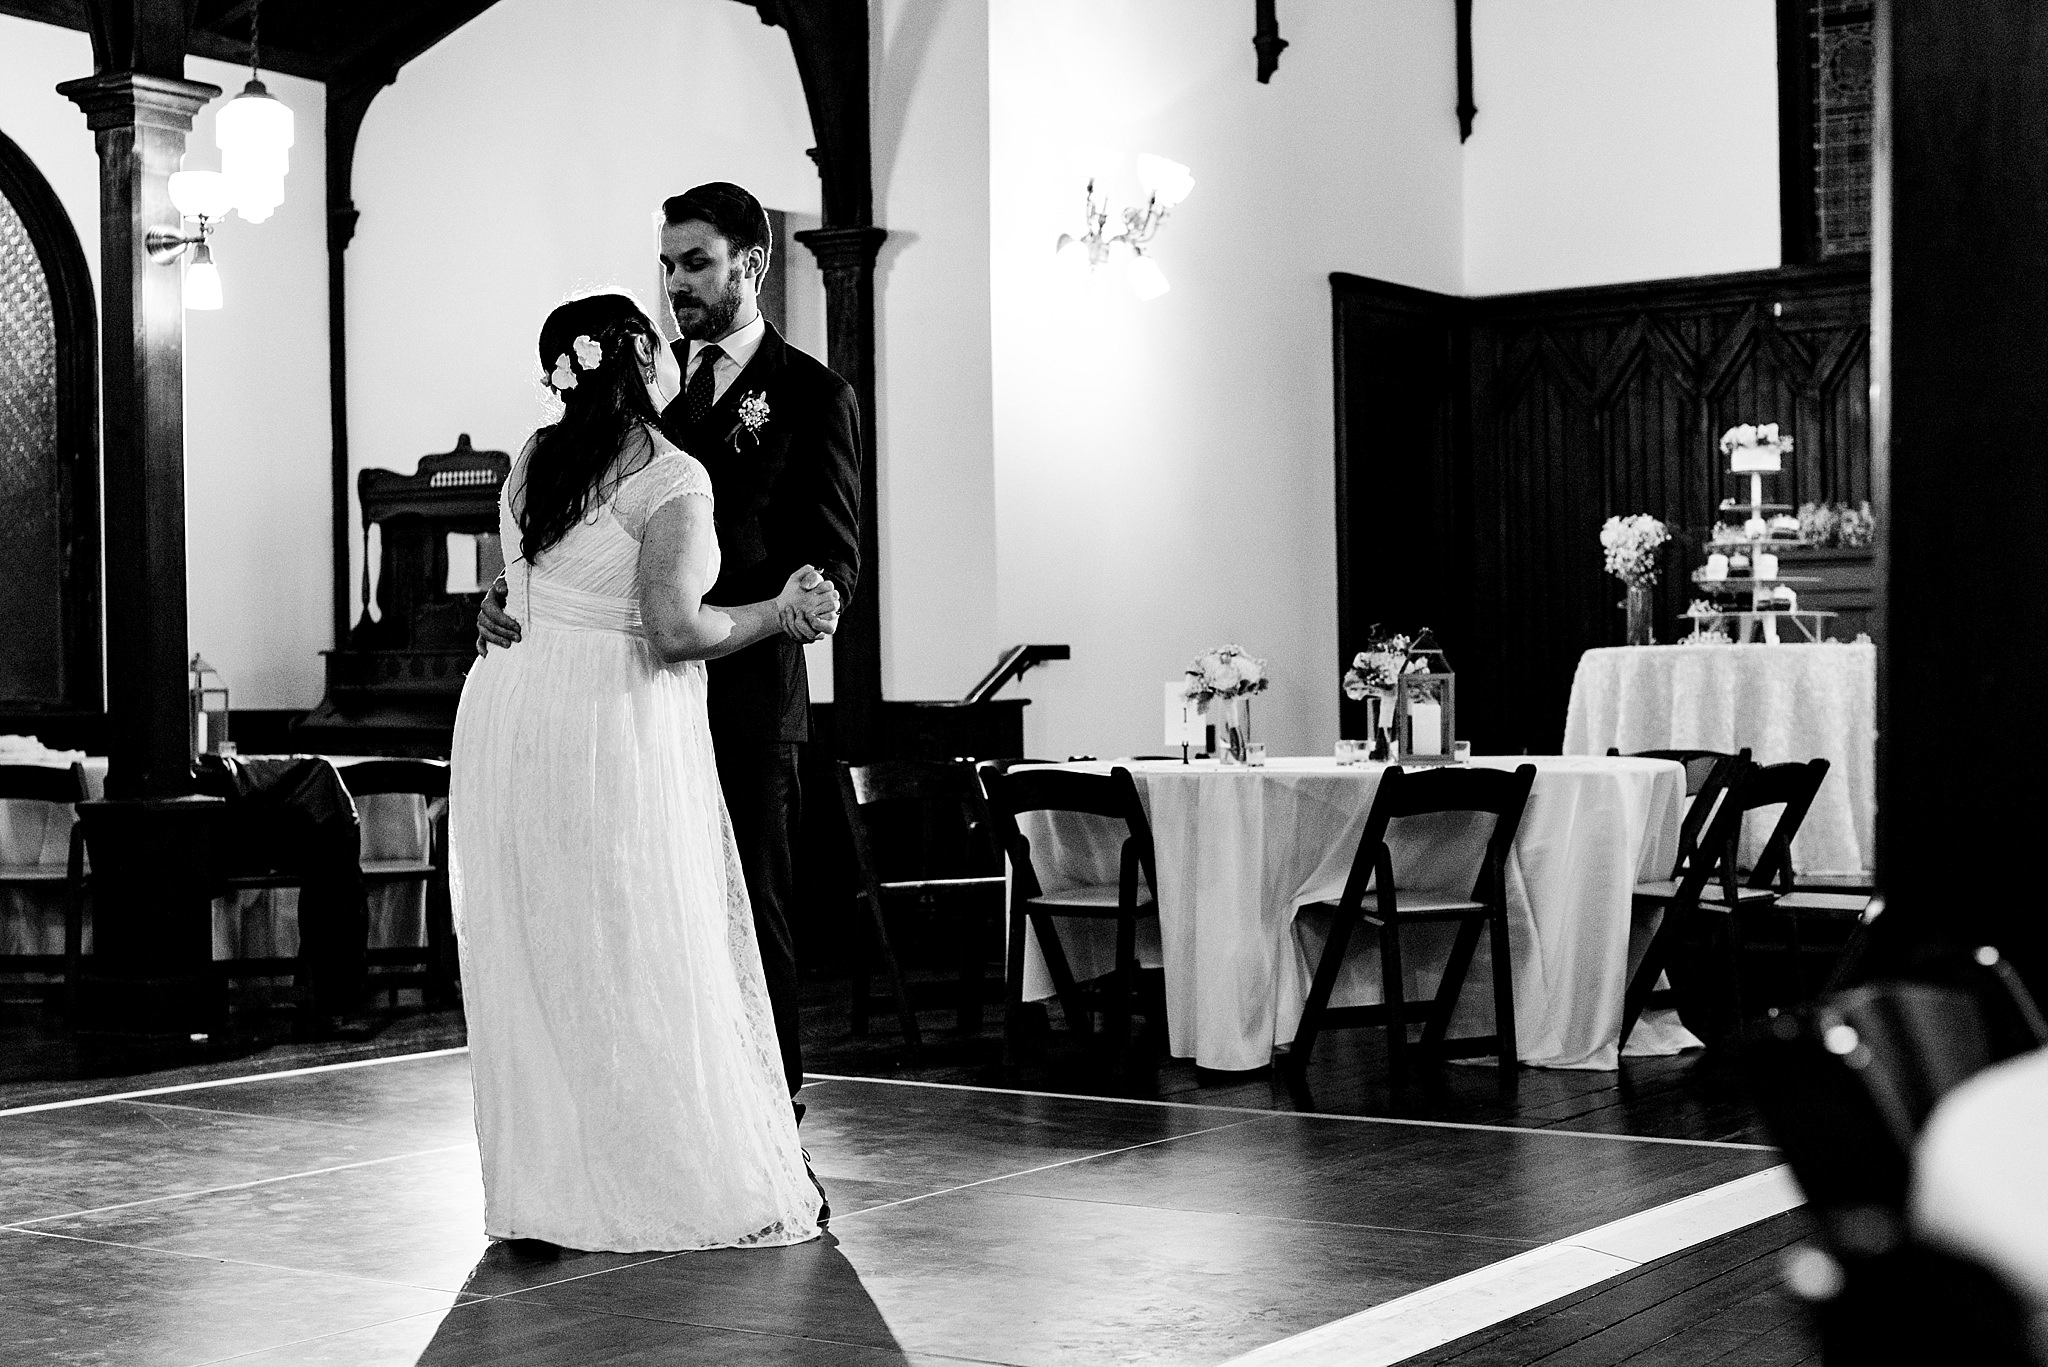 The bride and groom share a private last dance at All Saints Chapel in Raleigh, NC